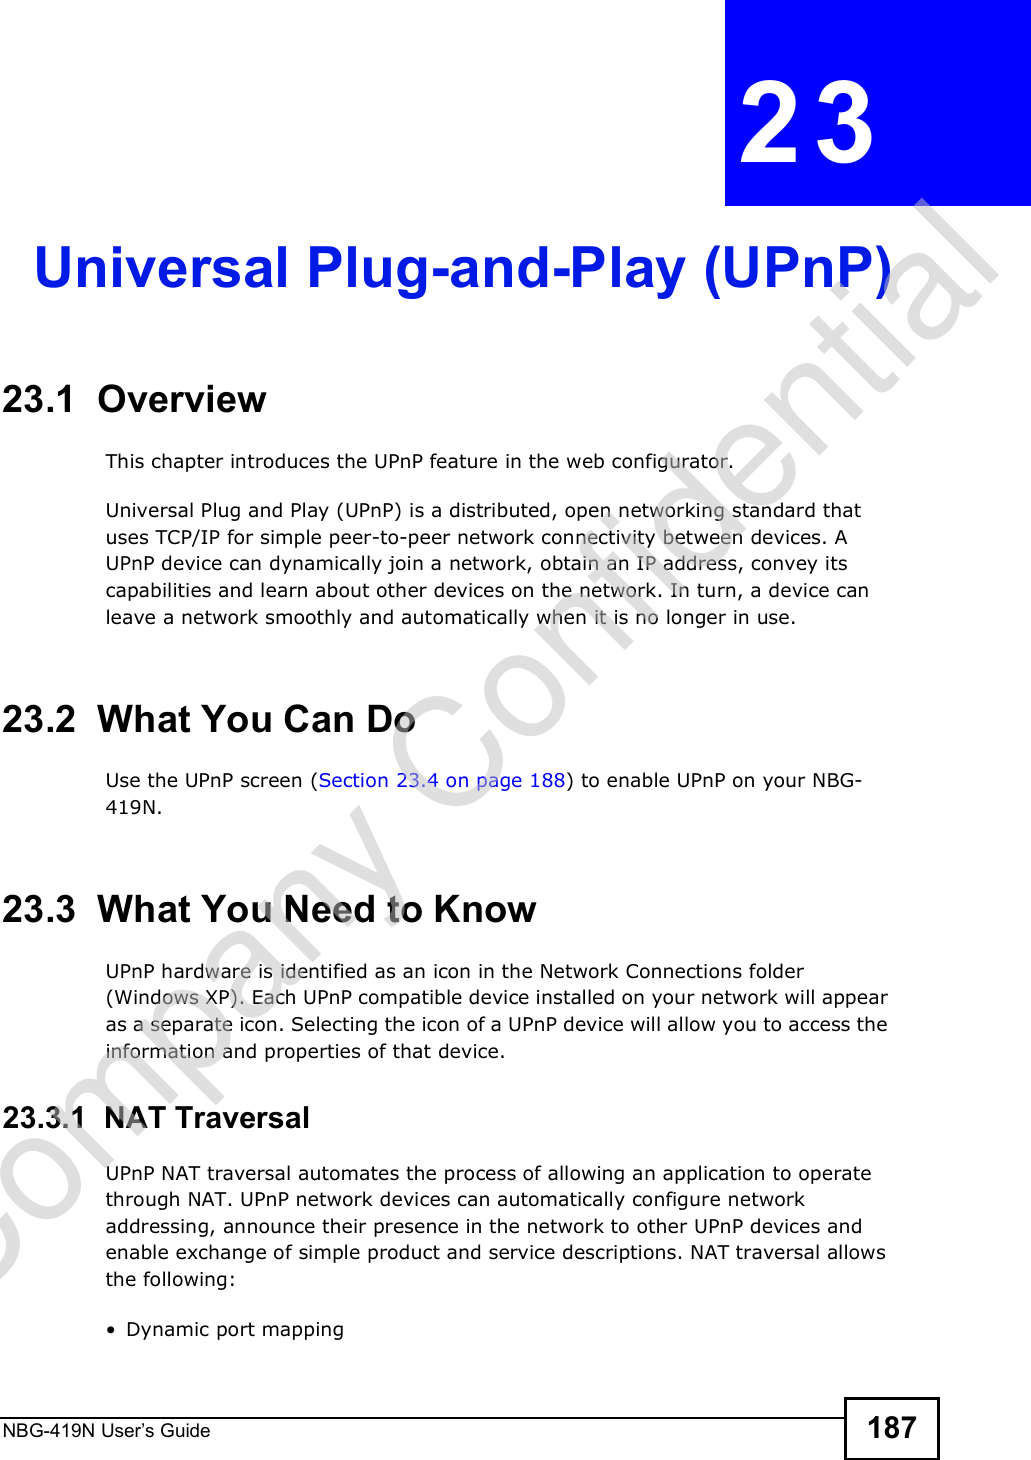 NBG-419N User s Guide 187CHAPTER  23 Universal Plug-and-Play (UPnP)23.1  Overview This chapter introduces the UPnP feature in the web configurator.Universal Plug and Play (UPnP) is a distributed, open networking standard that uses TCP/IP for simple peer-to-peer network connectivity between devices. A UPnP device can dynamically join a network, obtain an IP address, convey its capabilities and learn about other devices on the network. In turn, a device can leave a network smoothly and automatically when it is no longer in use.23.2  What You Can DoUse the UPnP screen (Section 23.4 on page 188) to enable UPnP on your NBG-419N.23.3  What You Need to KnowUPnP hardware is identified as an icon in the Network Connections folder (Windows XP). Each UPnP compatible device installed on your network will appear as a separate icon. Selecting the icon of a UPnP device will allow you to access the information and properties of that device. 23.3.1  NAT TraversalUPnP NAT traversal automates the process of allowing an application to operate through NAT. UPnP network devices can automatically configure network addressing, announce their presence in the network to other UPnP devices and enable exchange of simple product and service descriptions. NAT traversal allows the following: Dynamic port mappingCompany Confidential